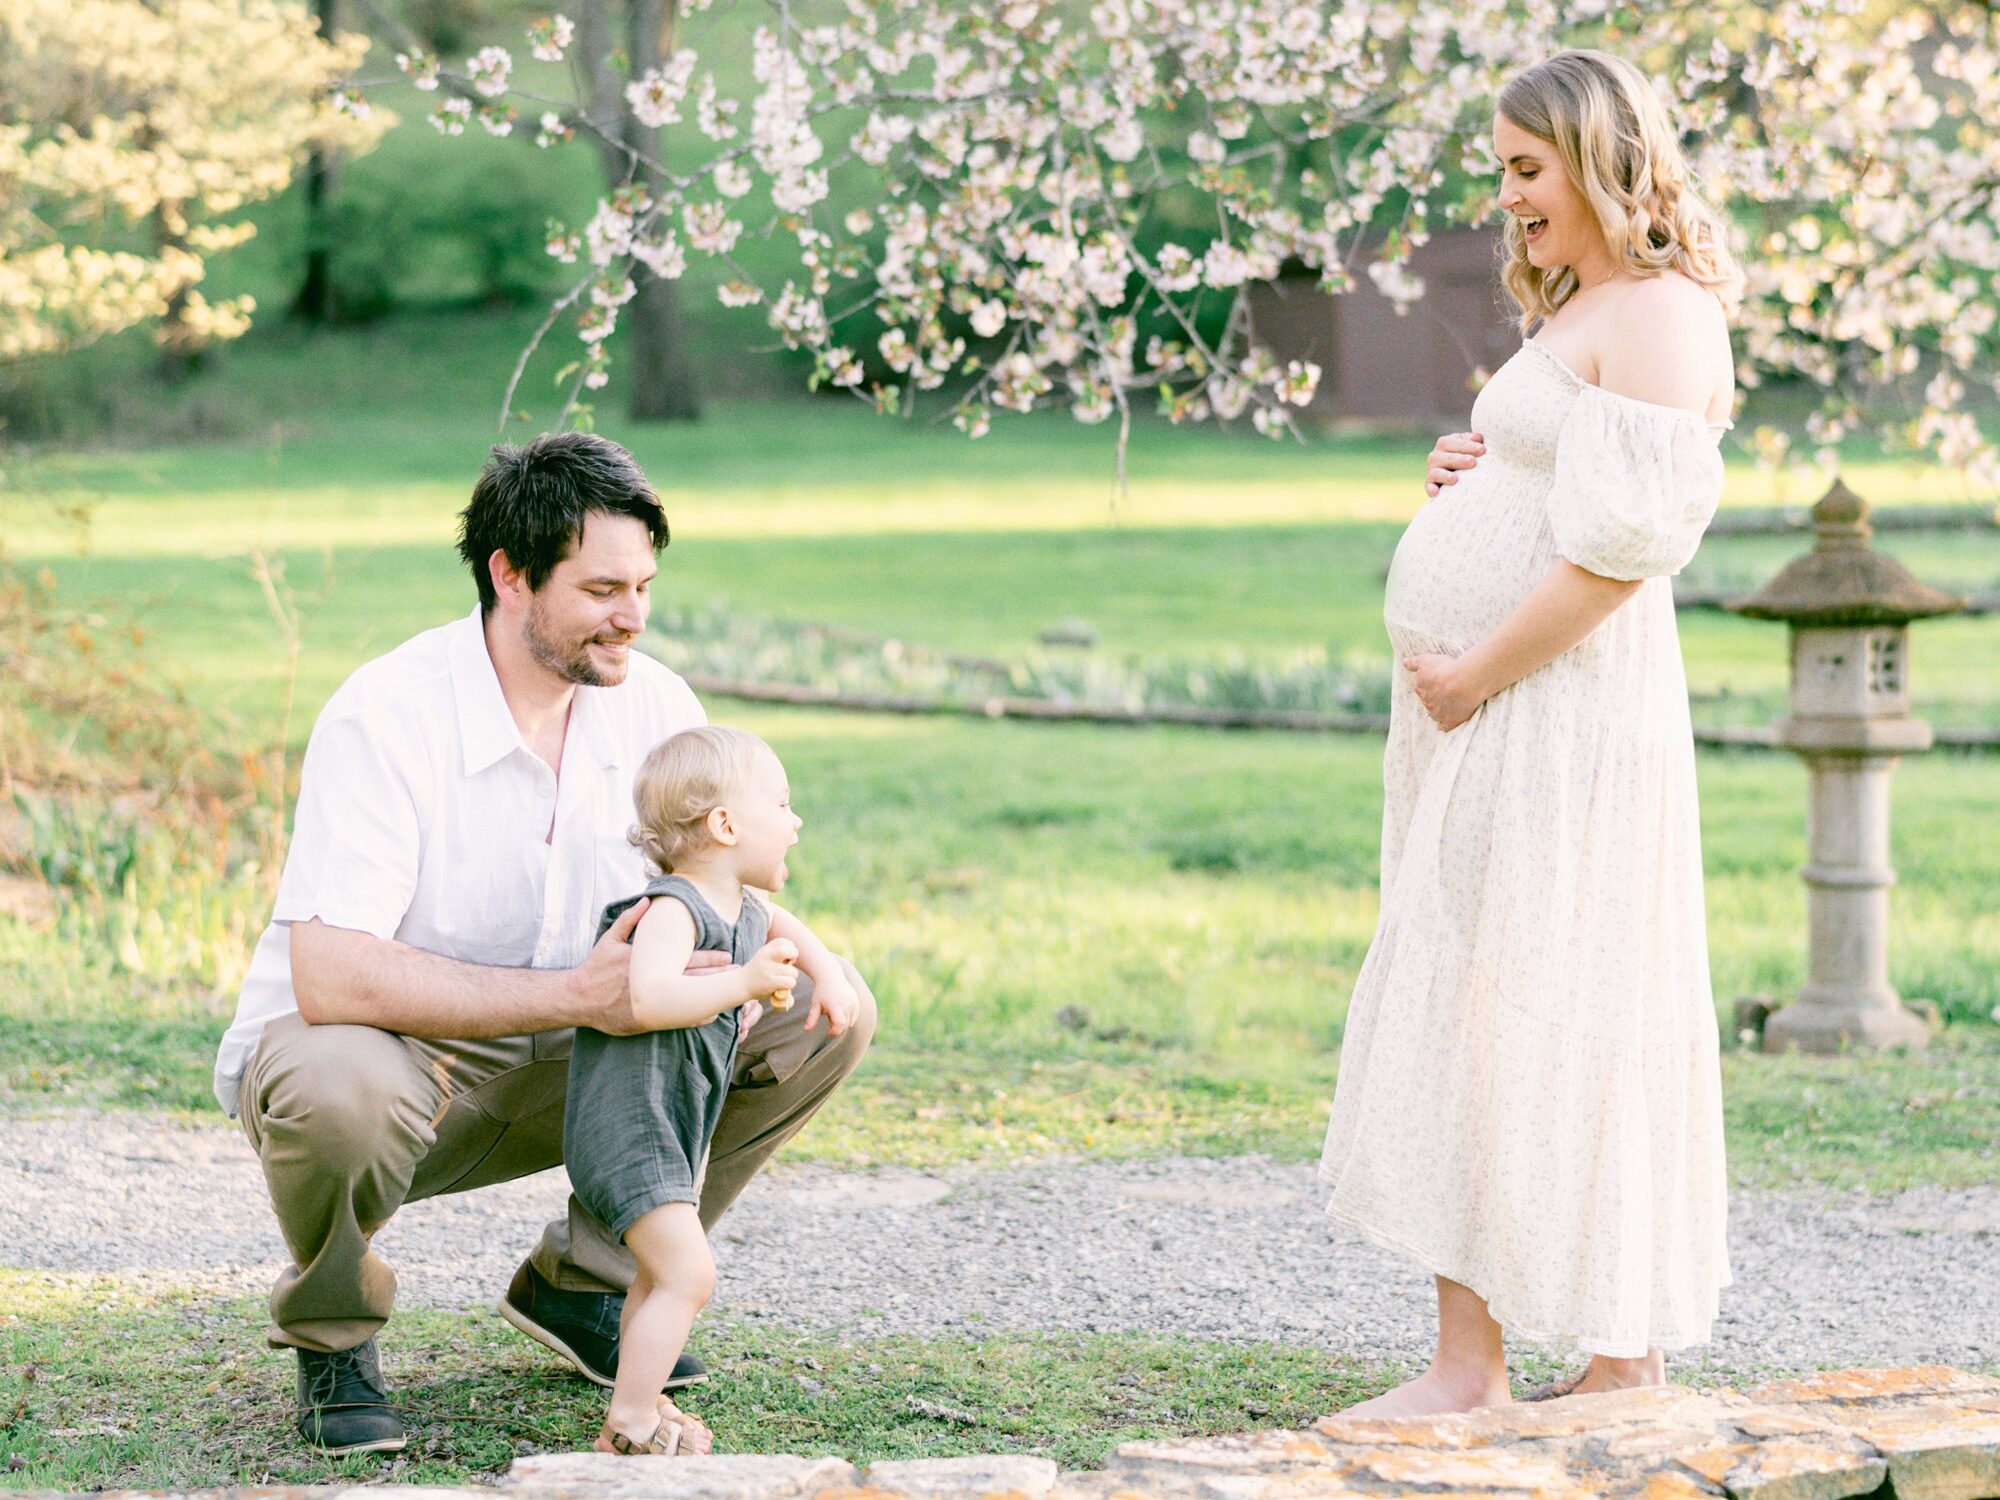 Franklin maternity photographer Courtney Houk captures dad squatting down and holding toddler, while standing mom with hands around her bump laugh down on them